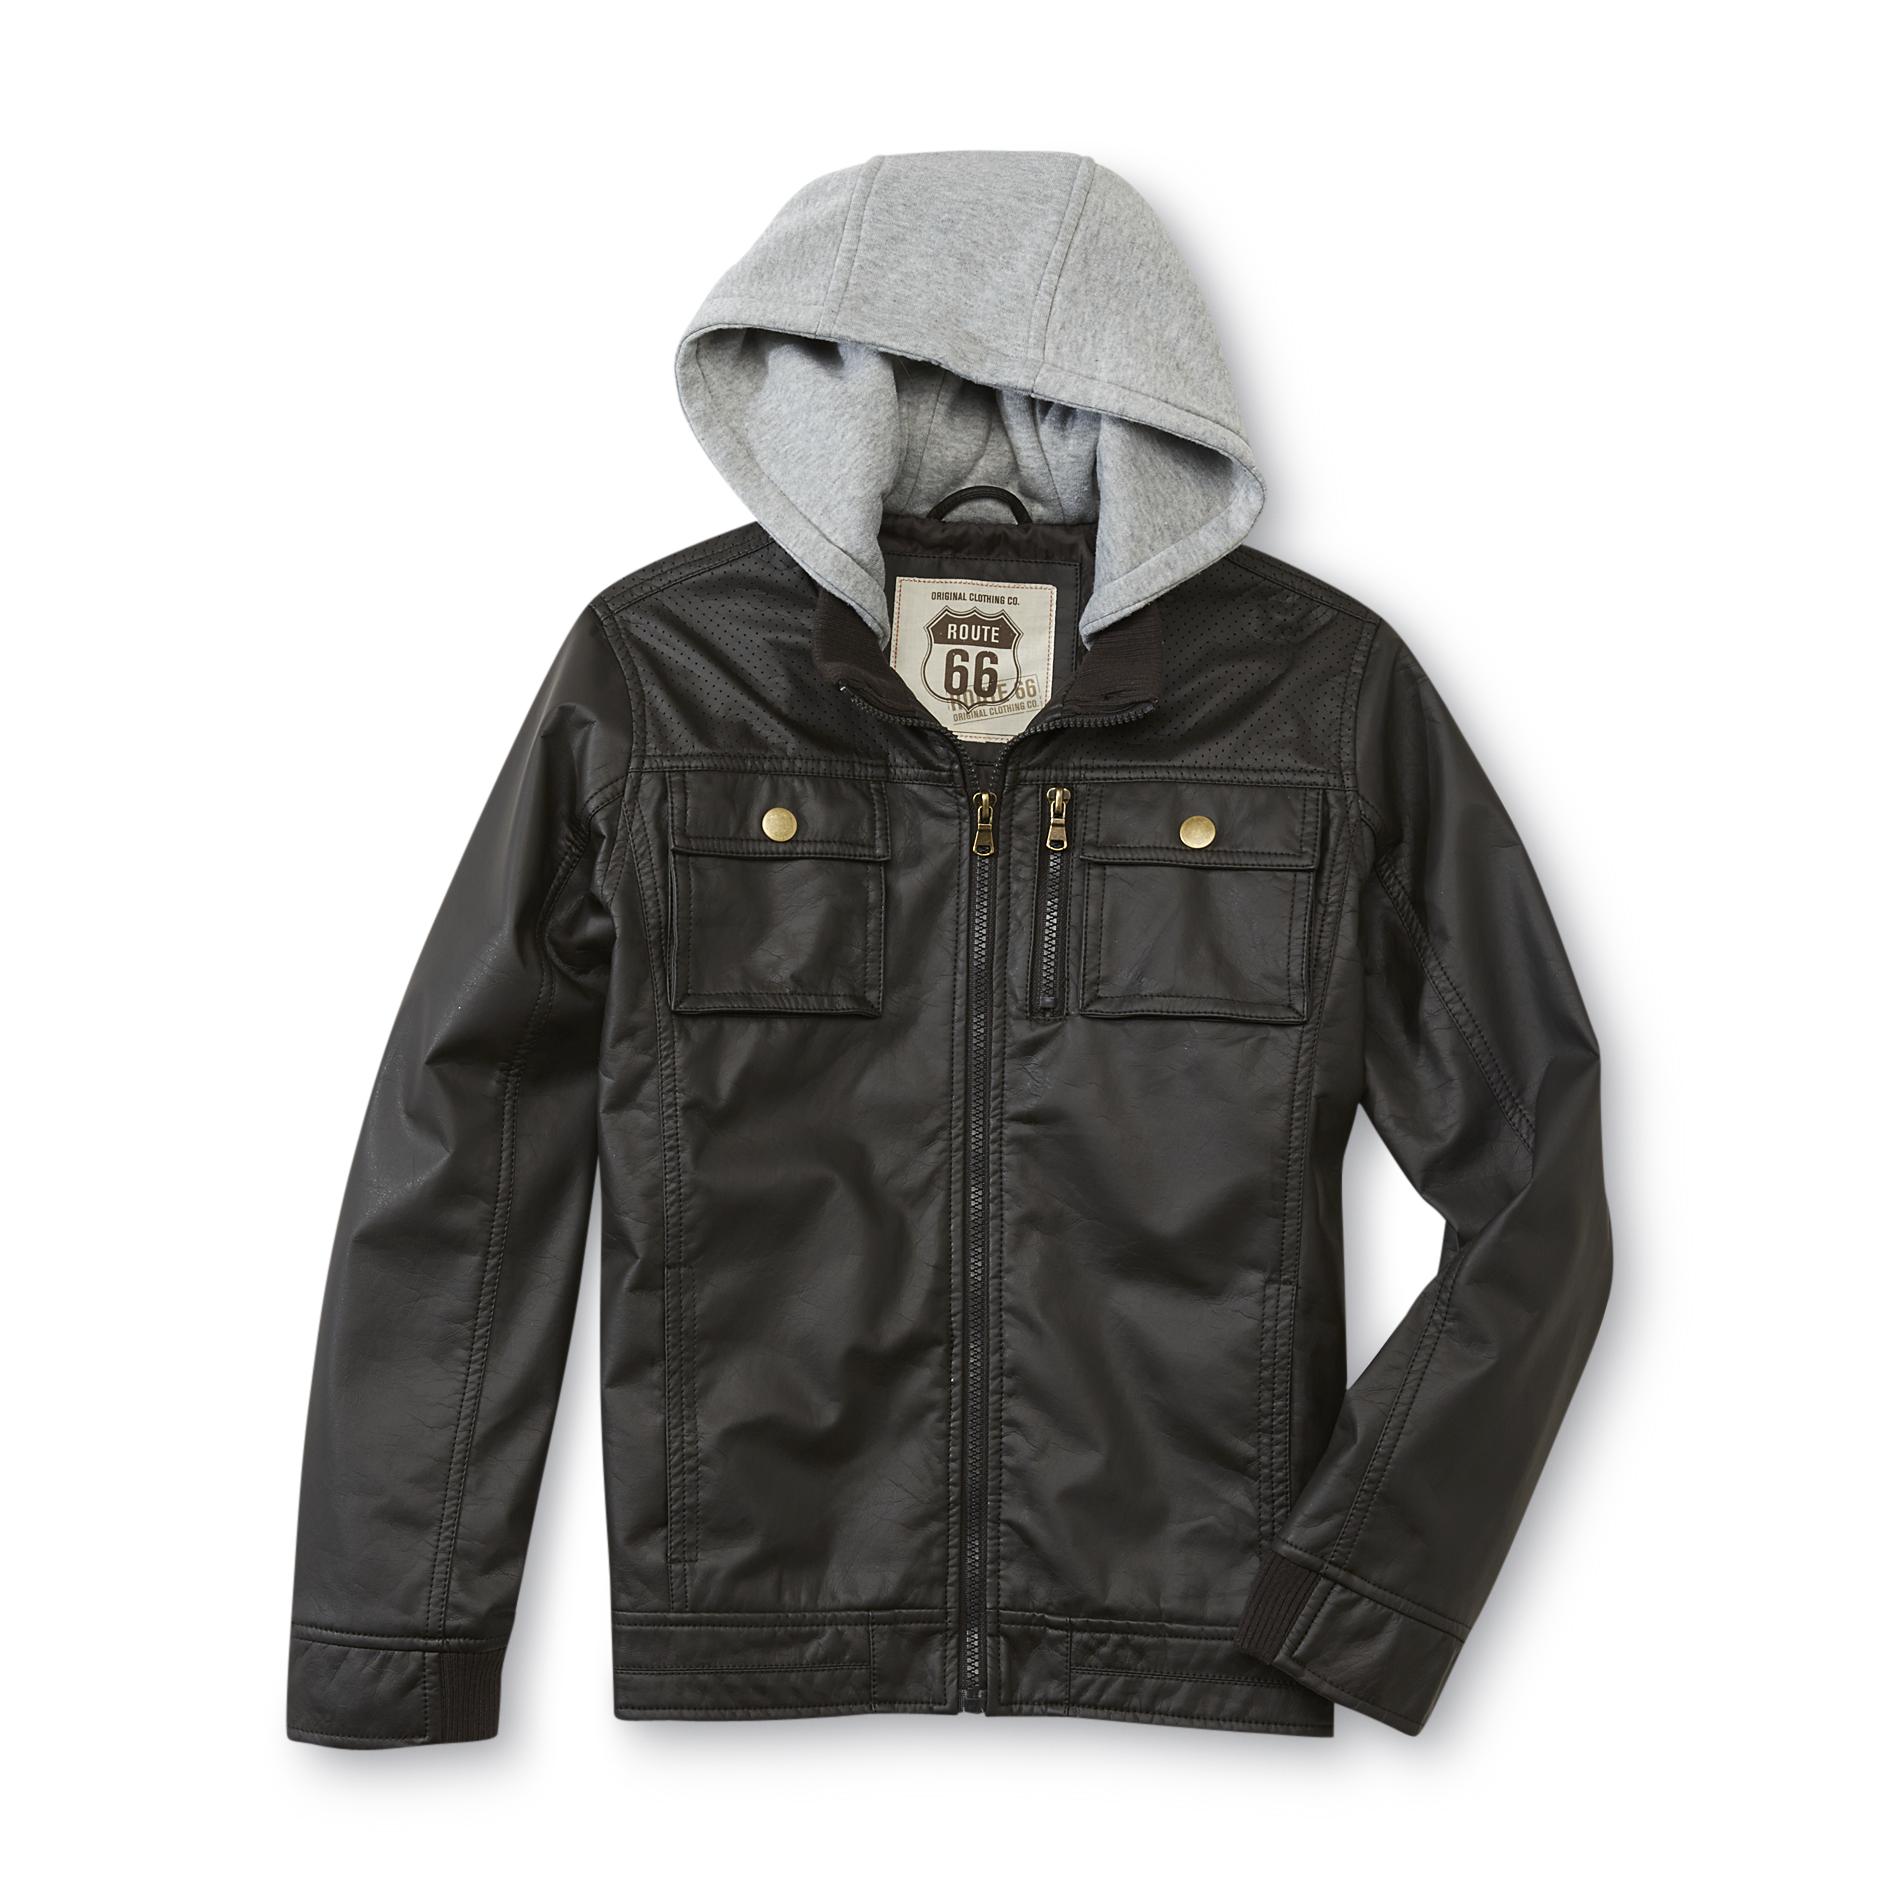 Route 66 Boy's Hooded Bomber Jacket